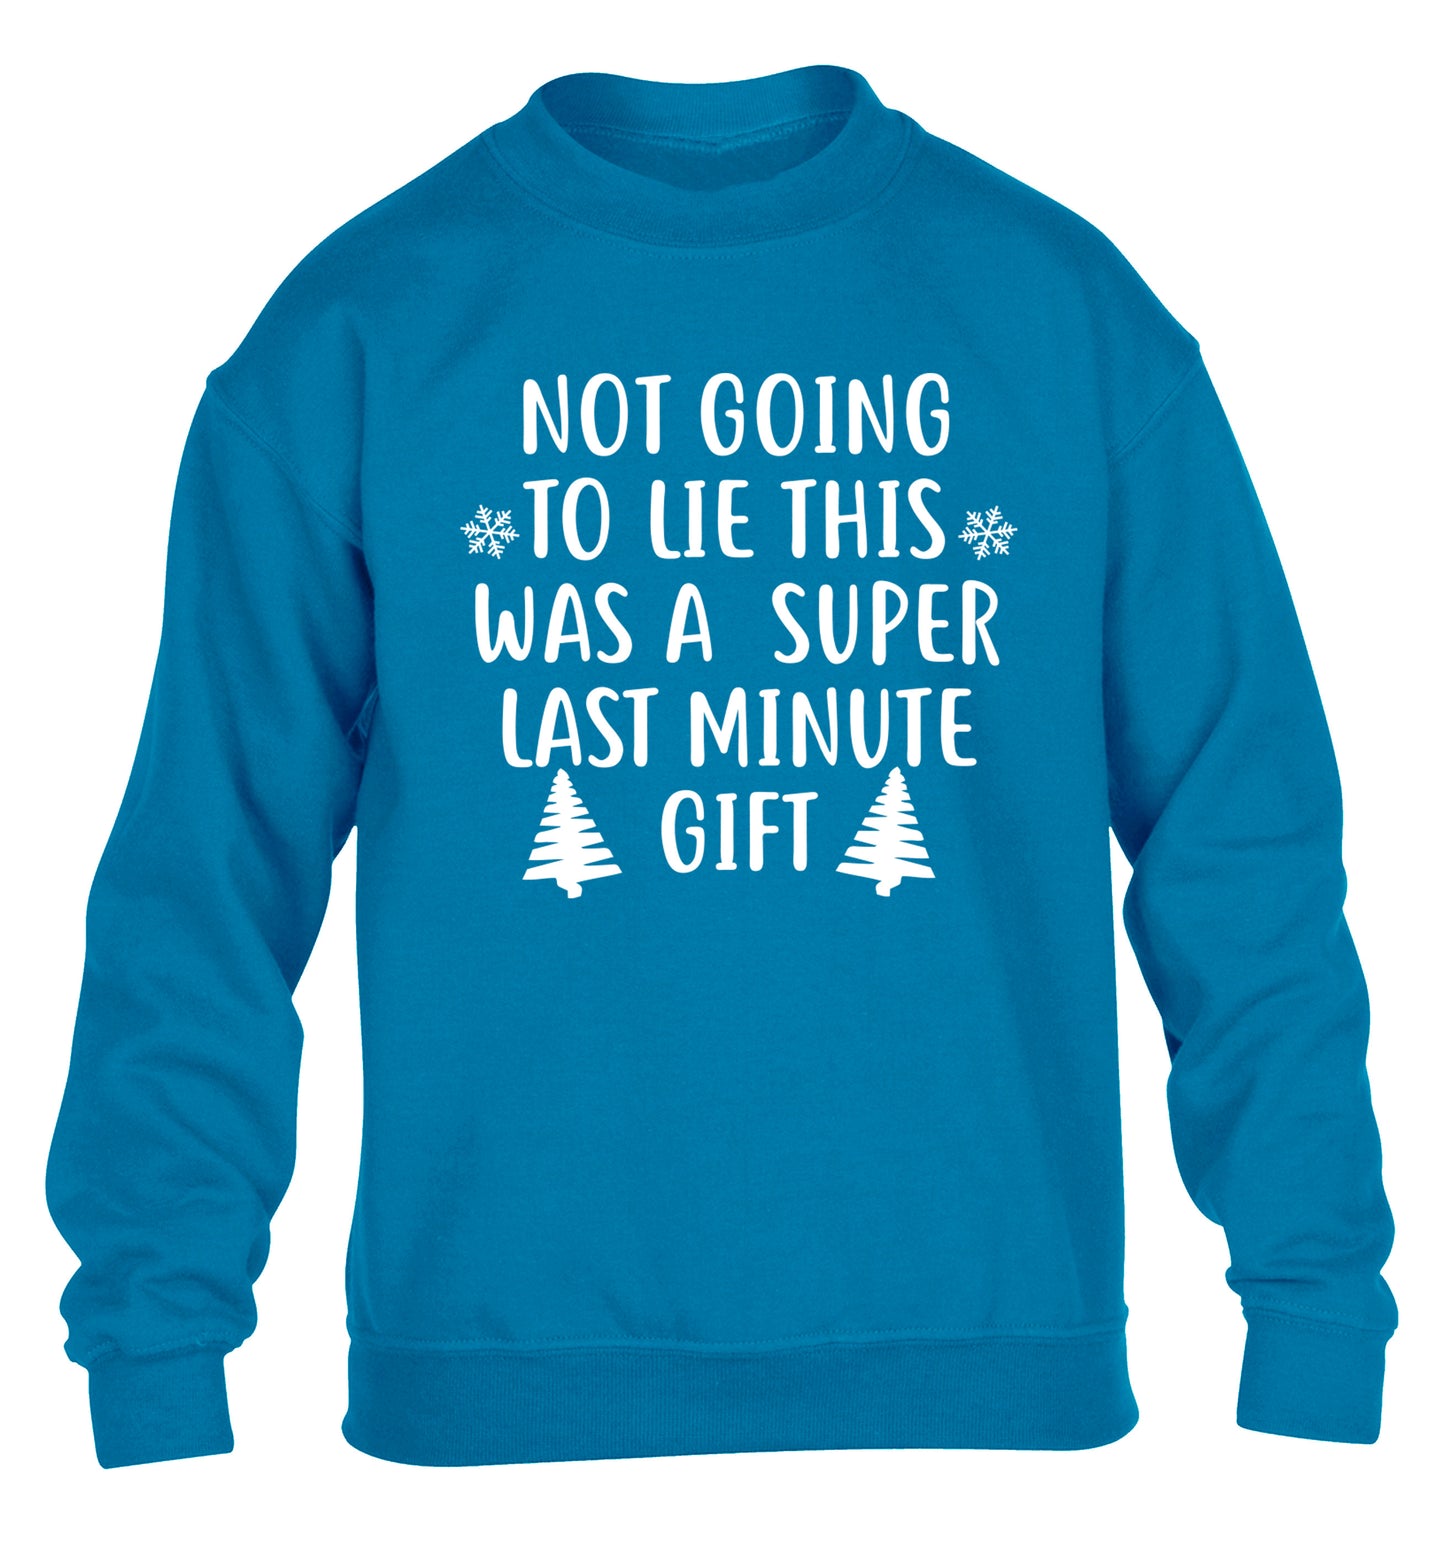 Not going to lie this was a super last minute gift children's blue sweater 12-13 Years